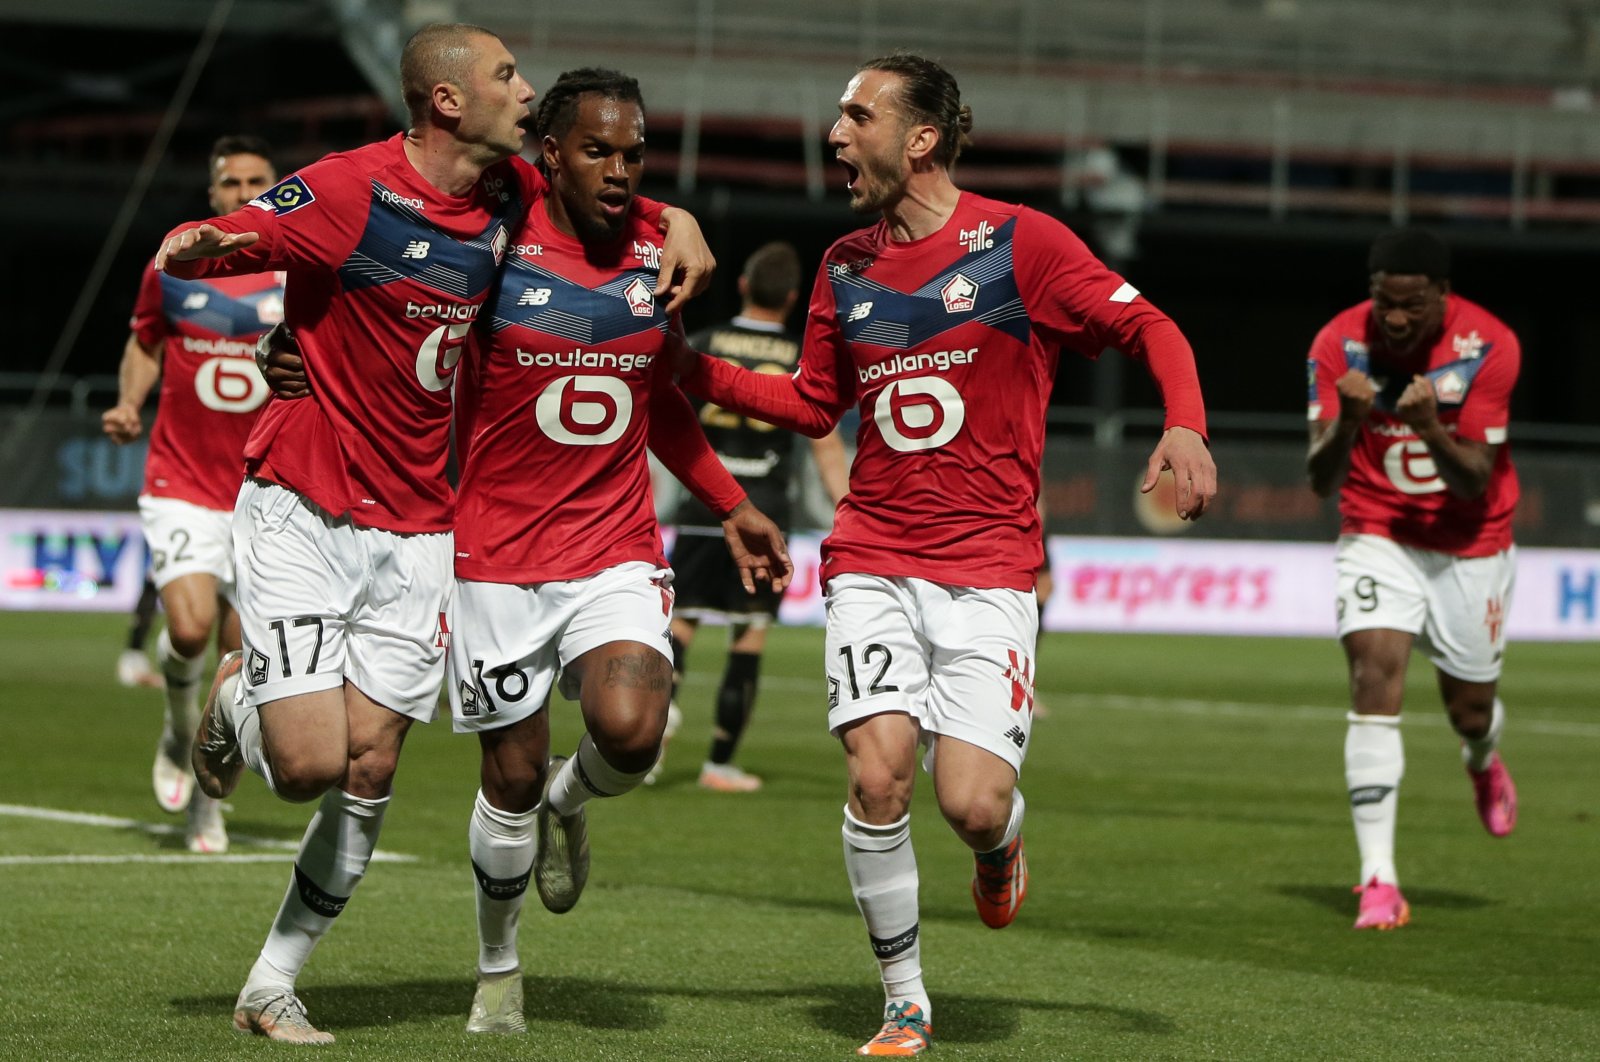 Lille's Burak Yılmaz (L) celebrates a goal with Renato Sanches (C) and Yusuf Yazıcı during the Ligue 1 match against Angers, in Angers, France, May 23, 2021. (EPA Photo)